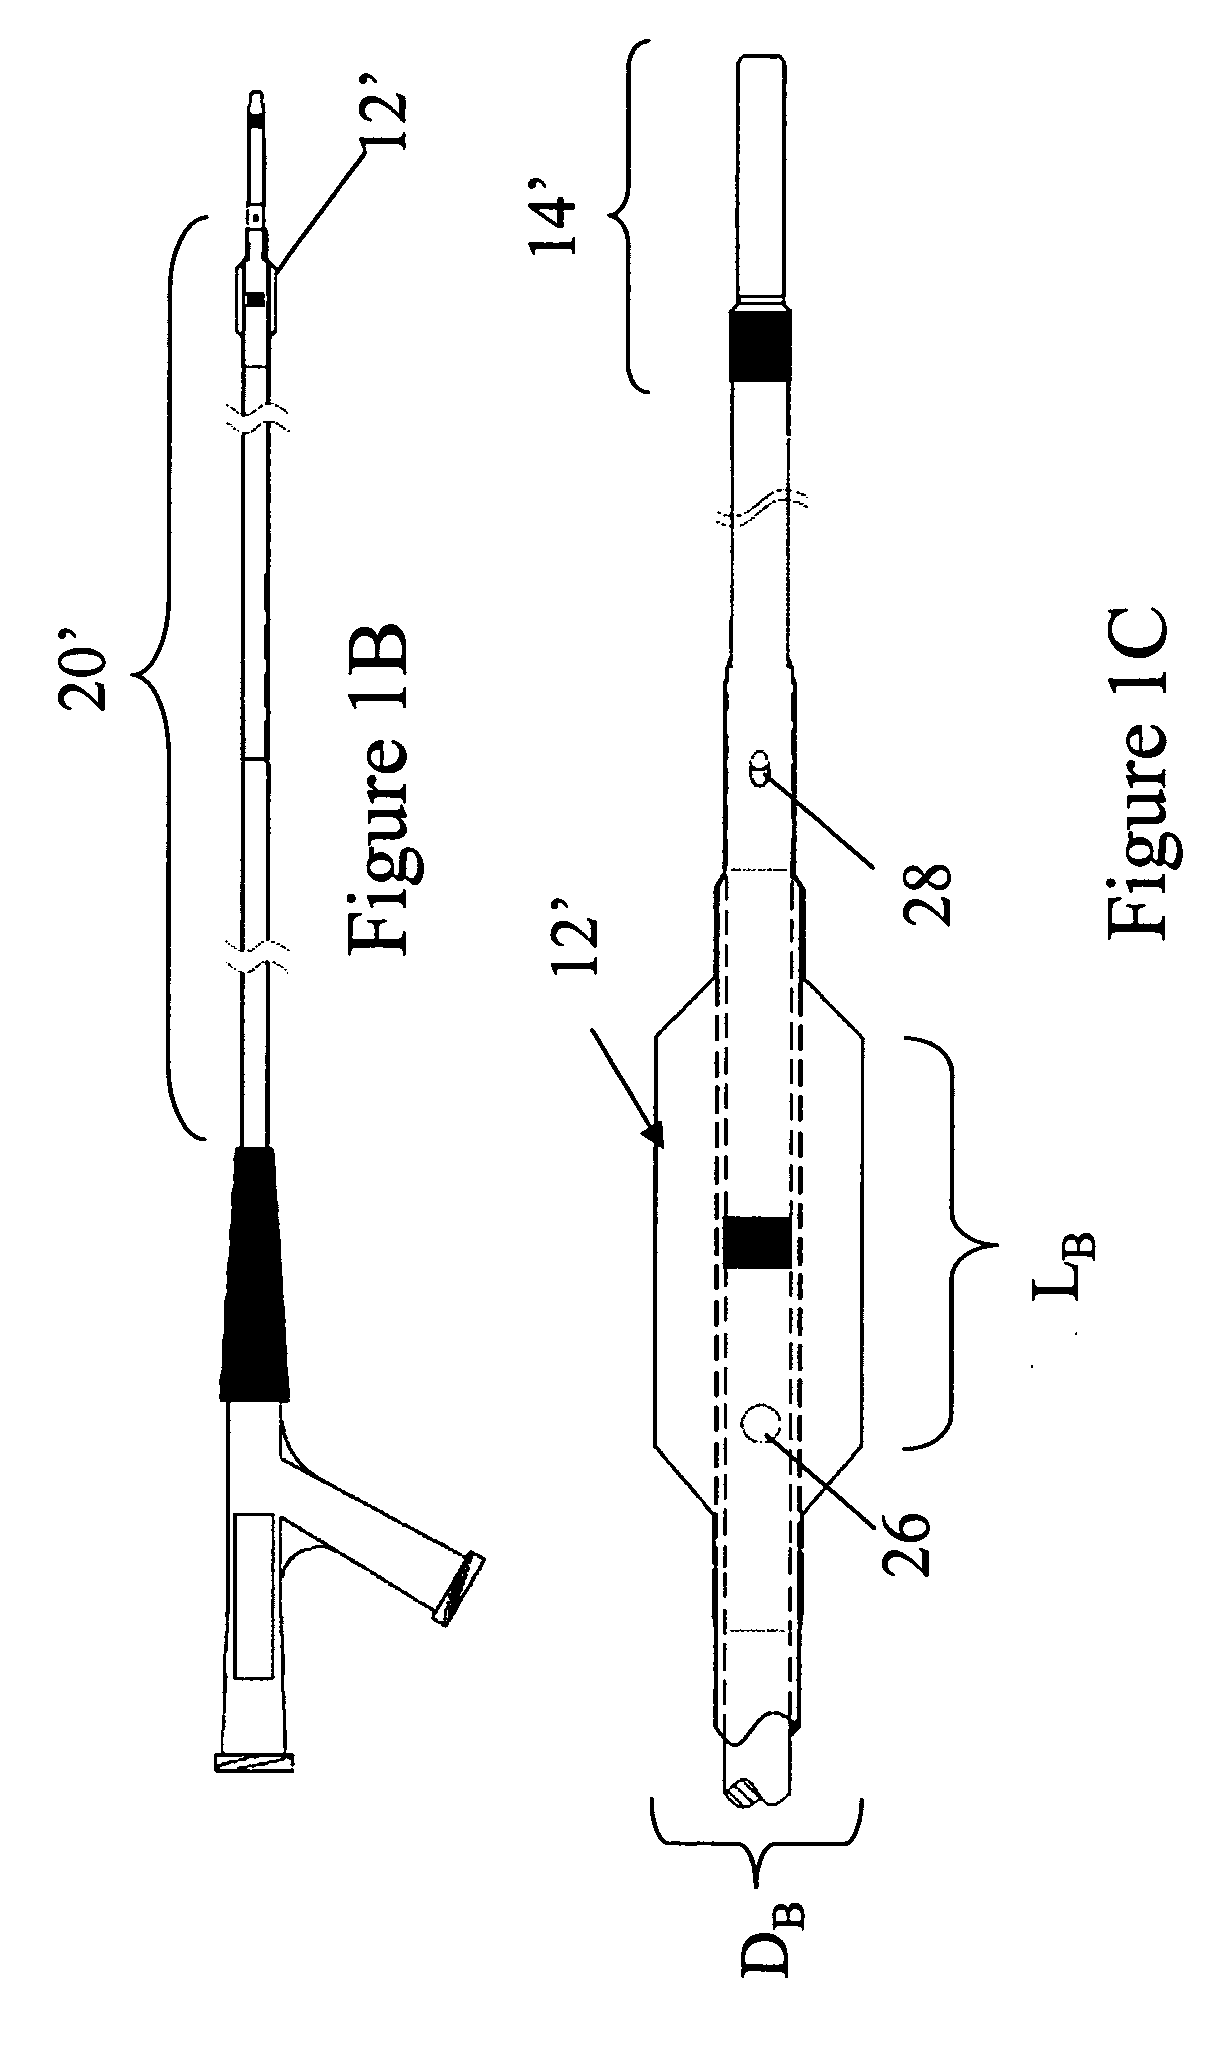 Fluid occluding devices and methods